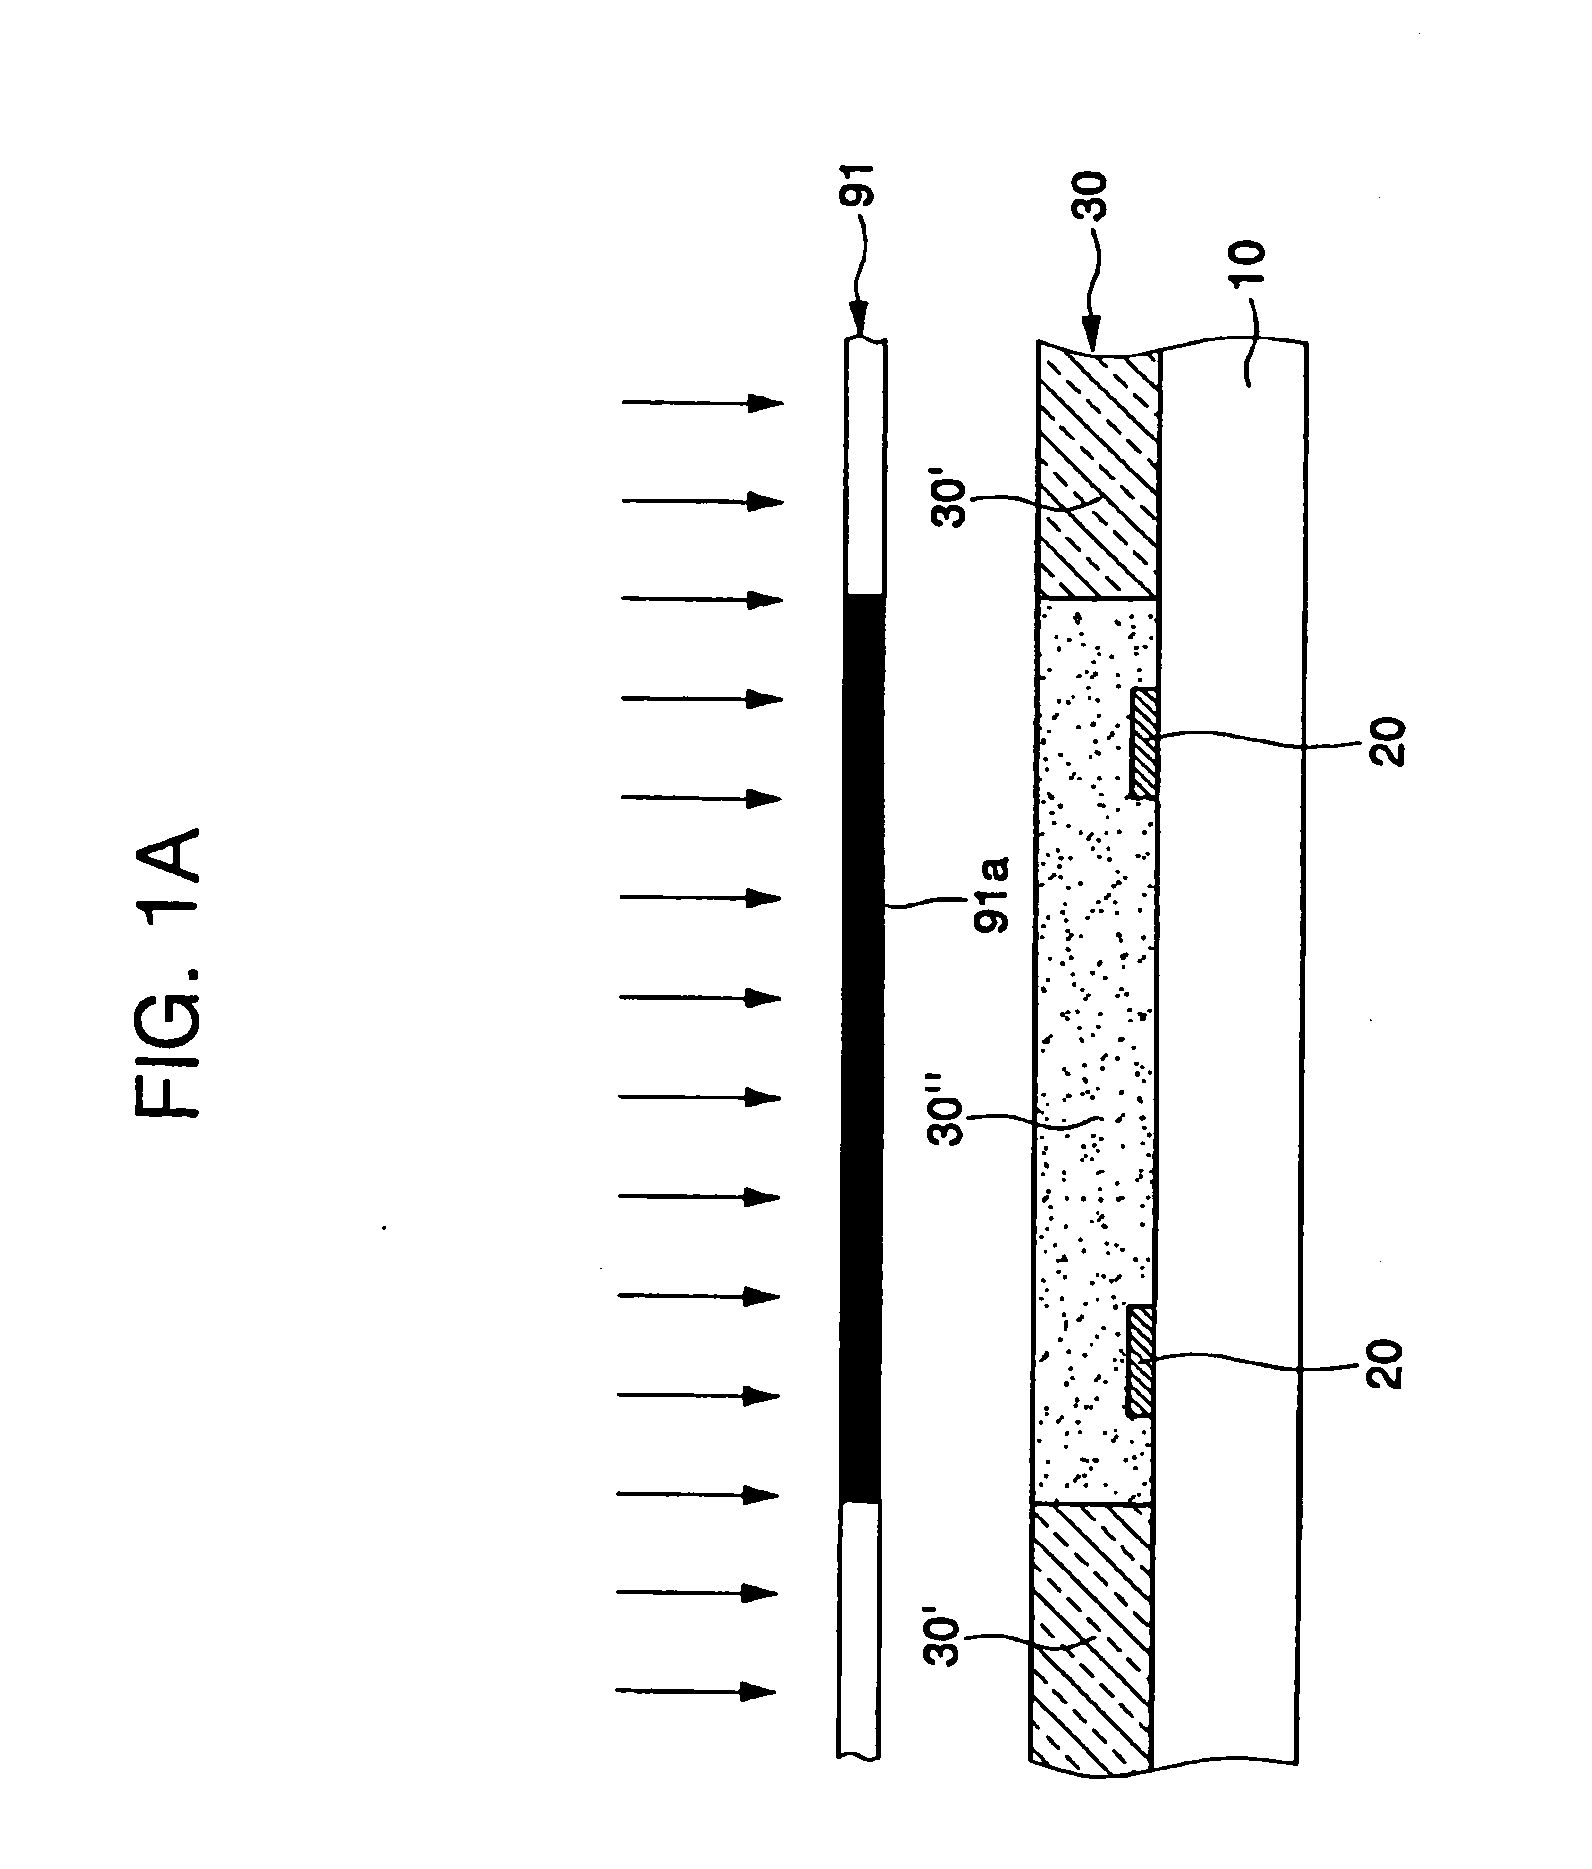 Method of fabricating an inkjet print head using a photo-curable resin composition